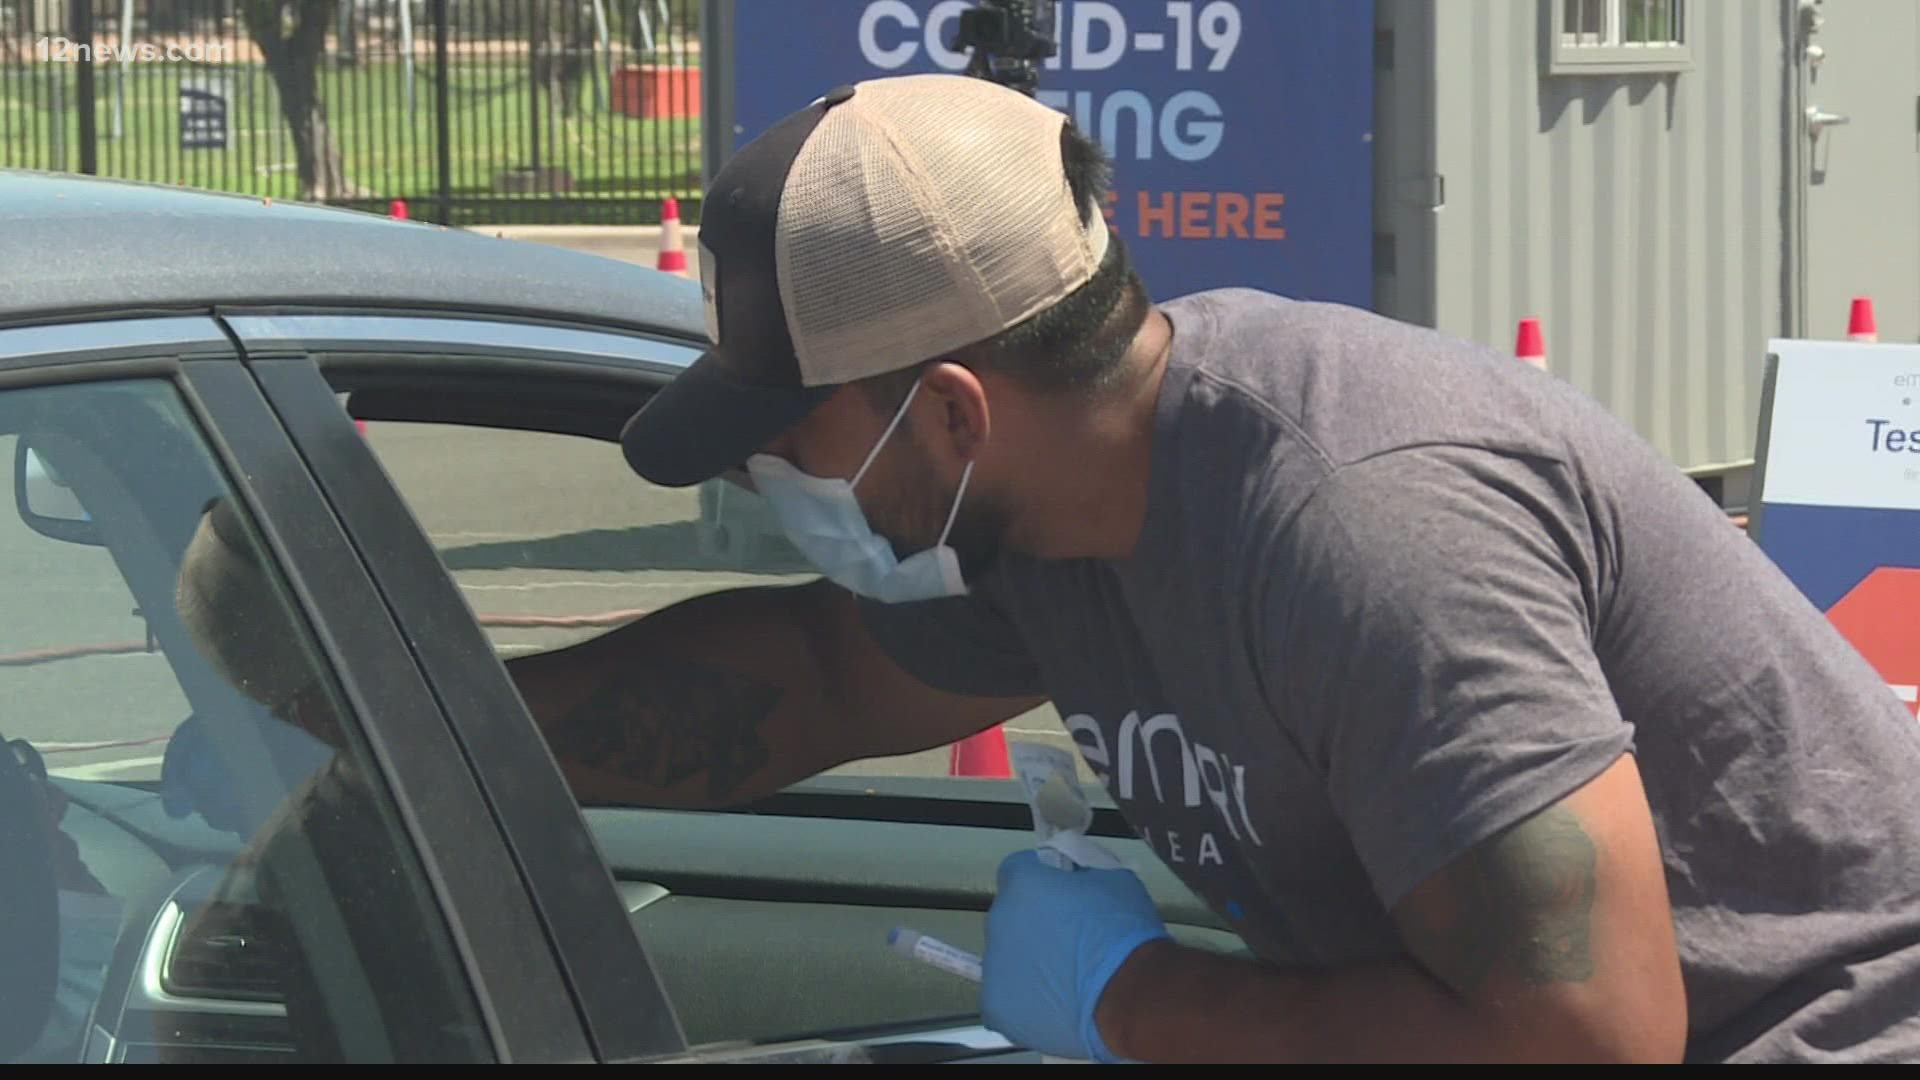 The Delta variant of COVID is making its way through the Valley community and that's causing a major increase in testing. One site in Mesa has seen a 1000% increase.